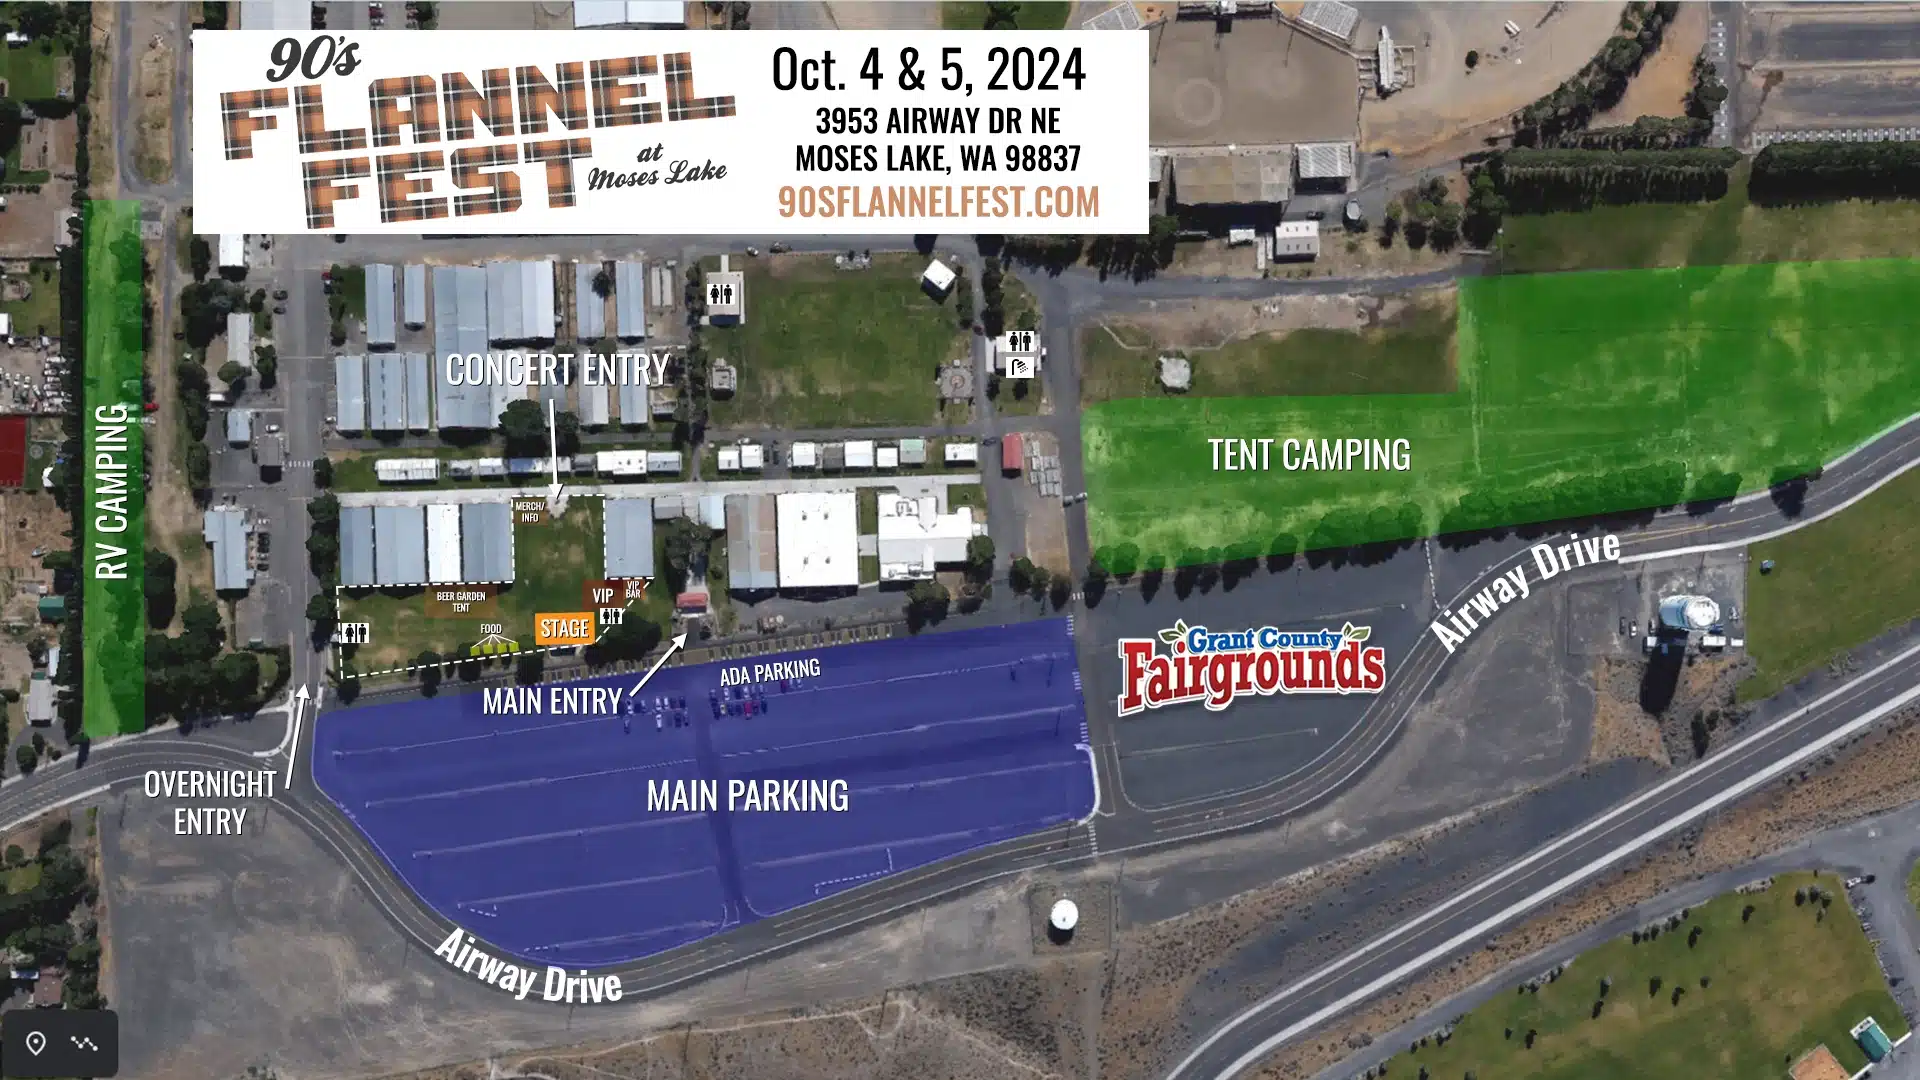 90s flannel fest at moses lake event map